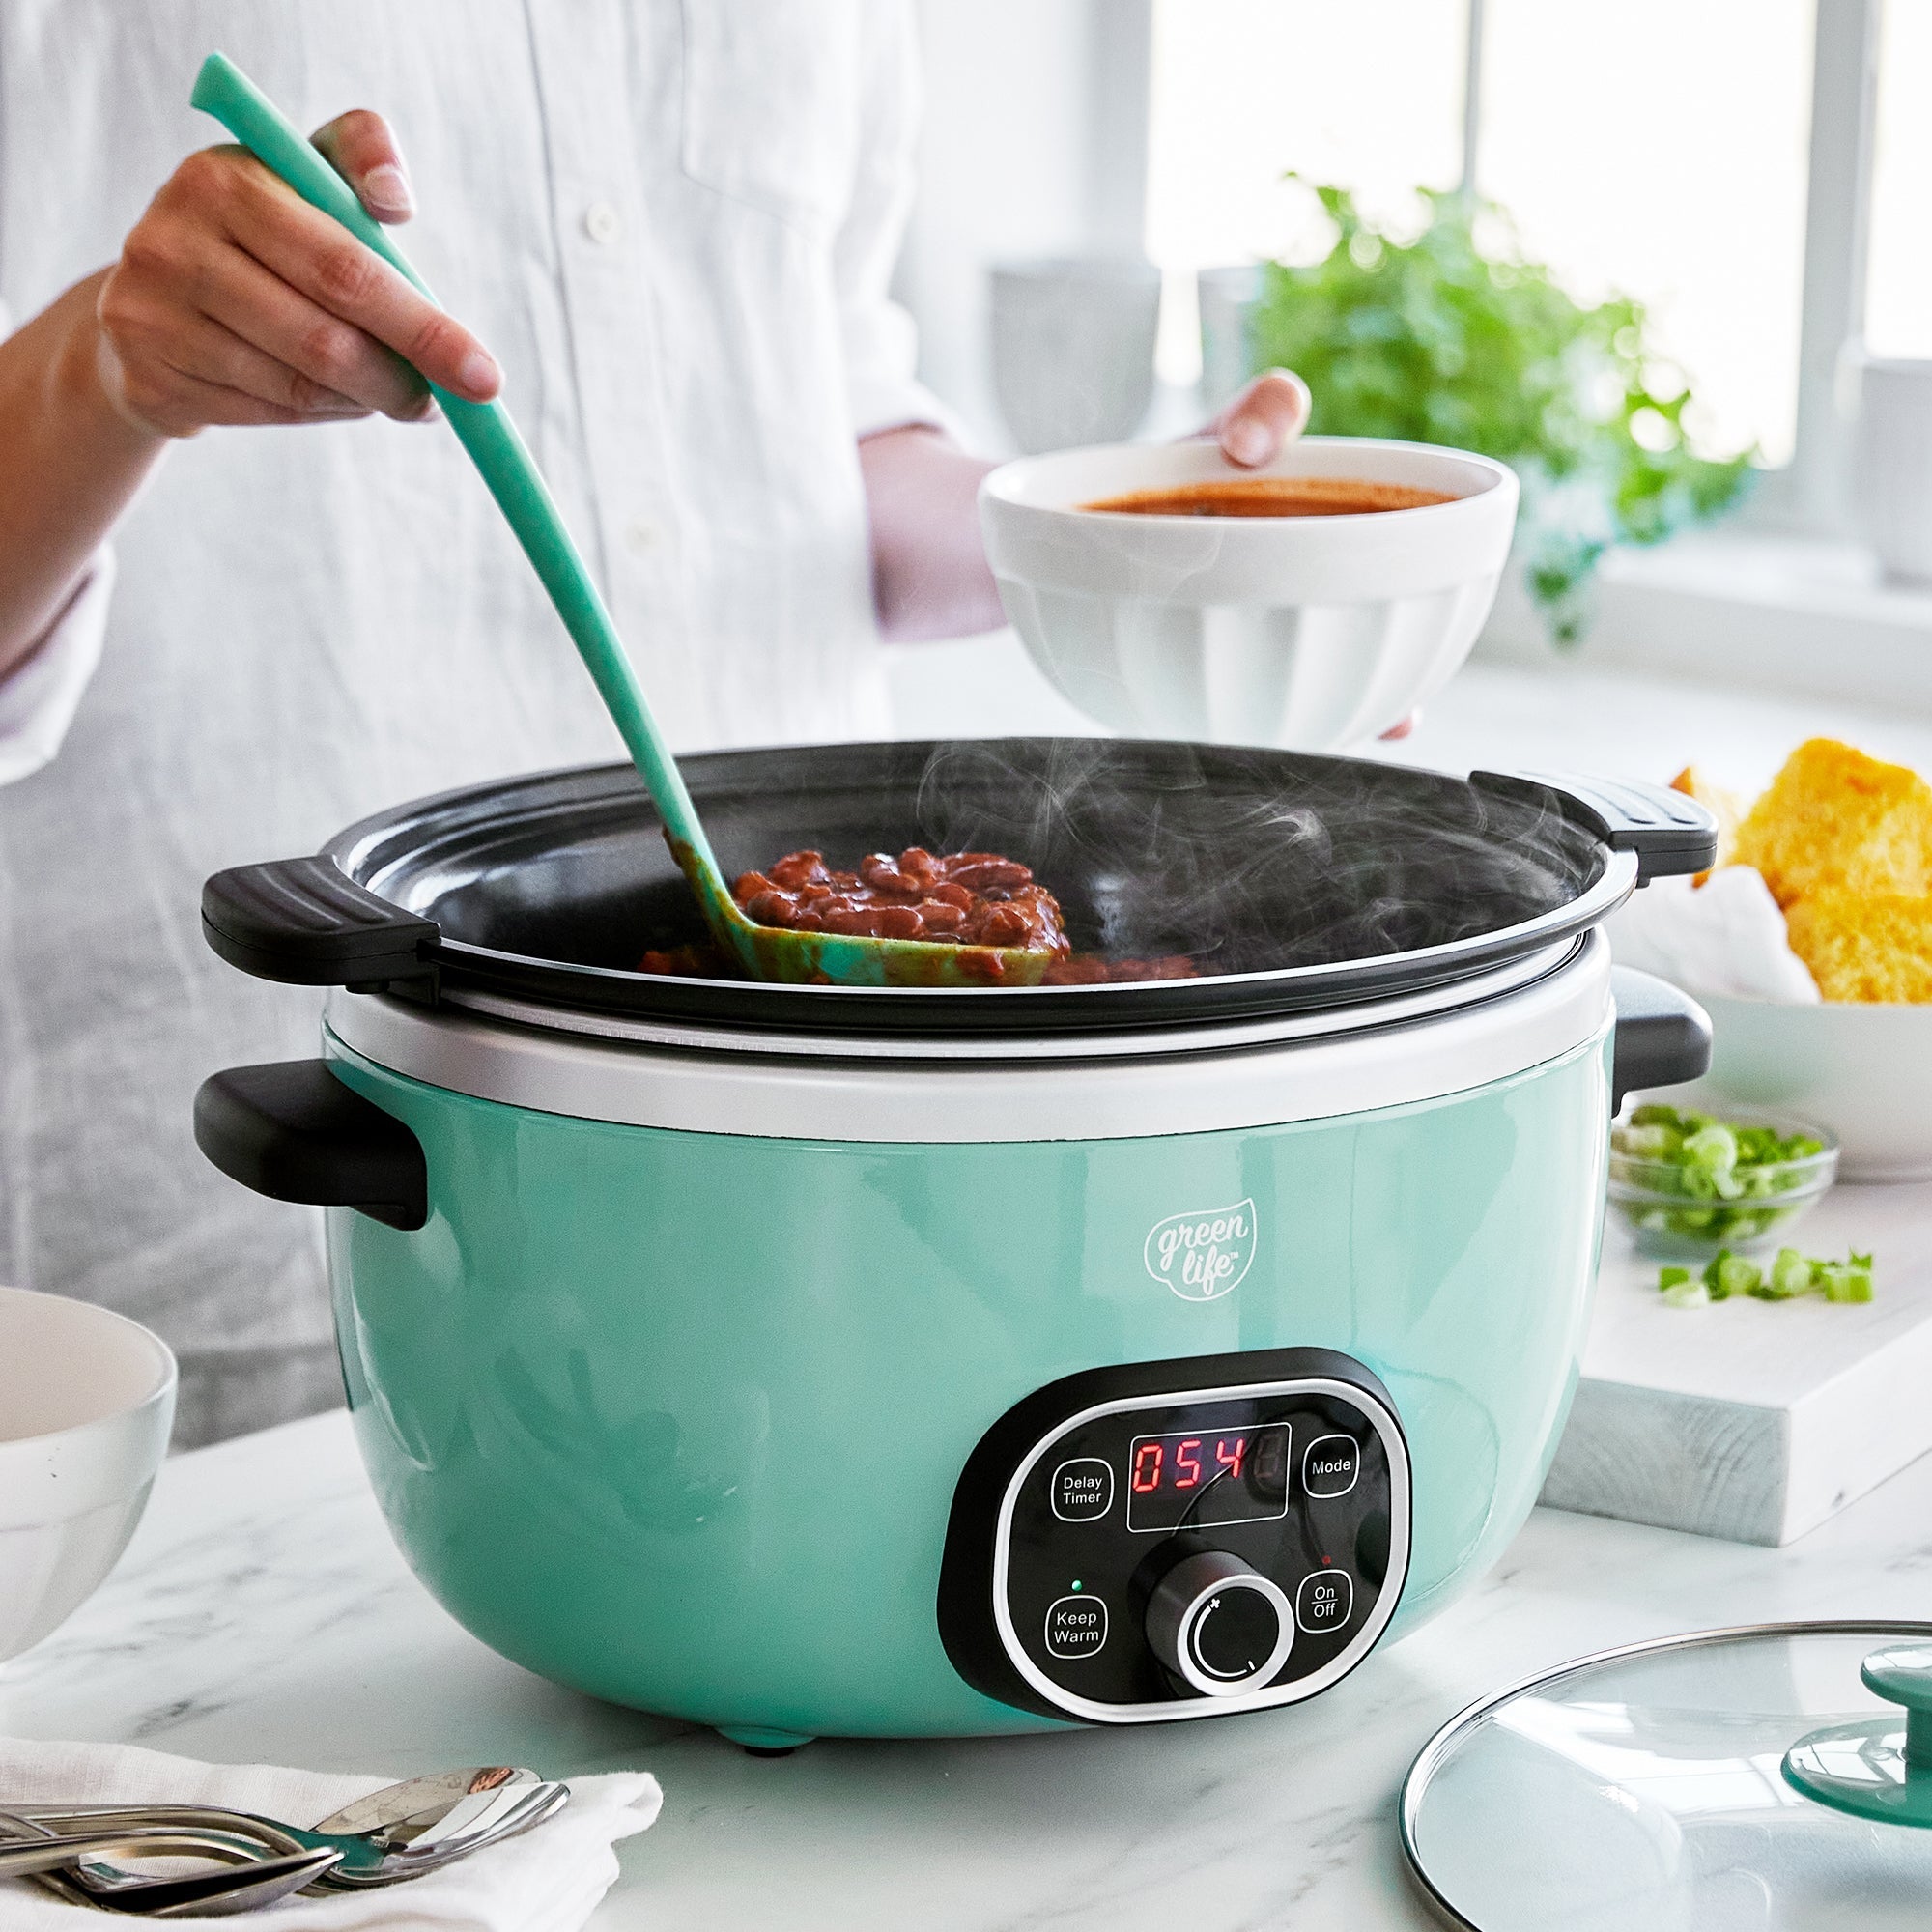 GreenLife Electric Ice Cream Maker - Turquoise (Blue)